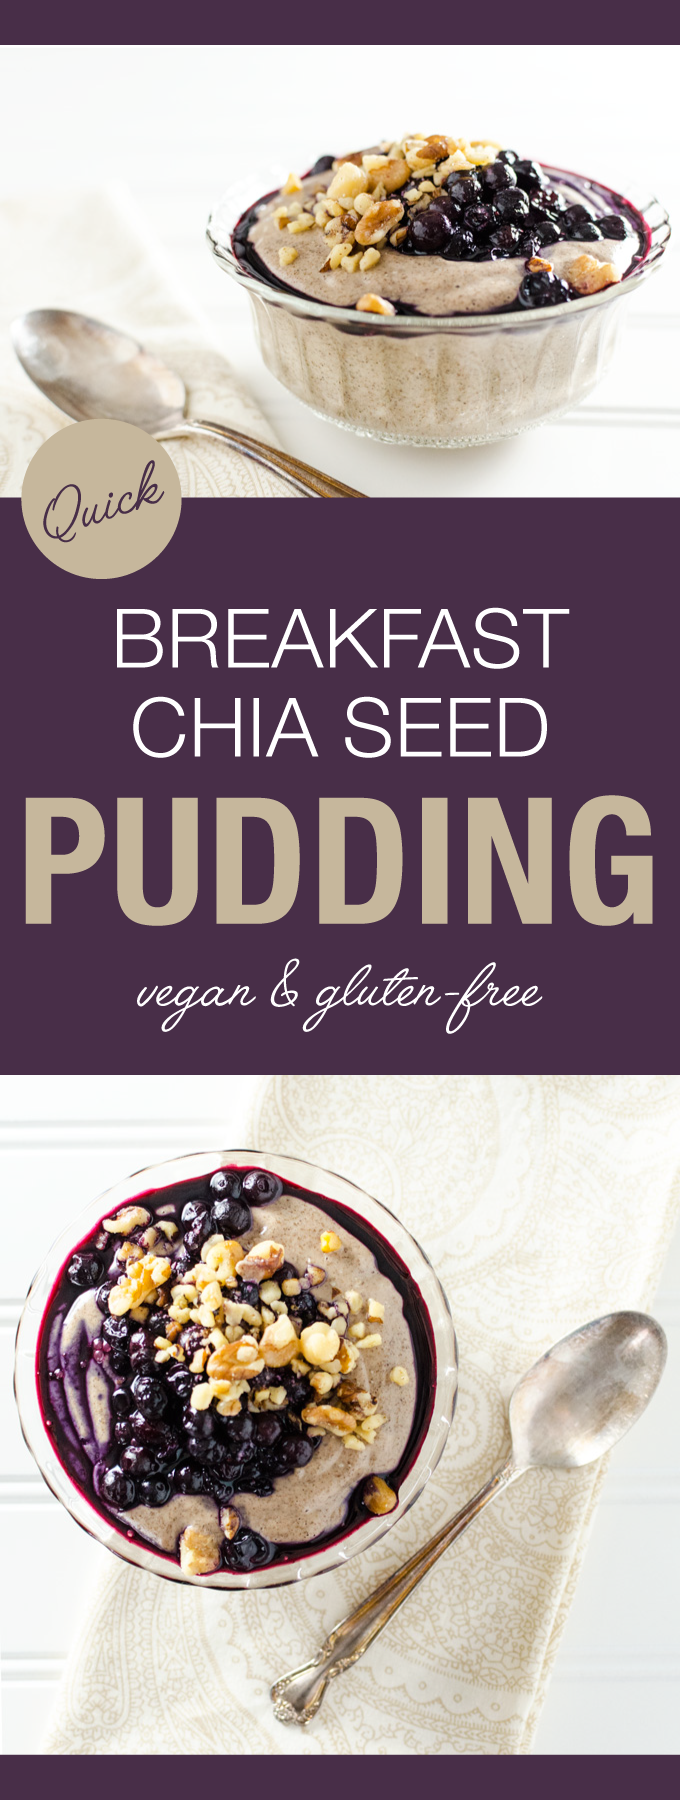 Quick Breakfast Chia Seed Pudding - this vegan and gluten-free recipe is ready in minutes - no overnight soaking required. It's an easy way to enjoy a healthy breakfast, but it's also tasty enough for a dessert or snack! | VeggiePrimer.com